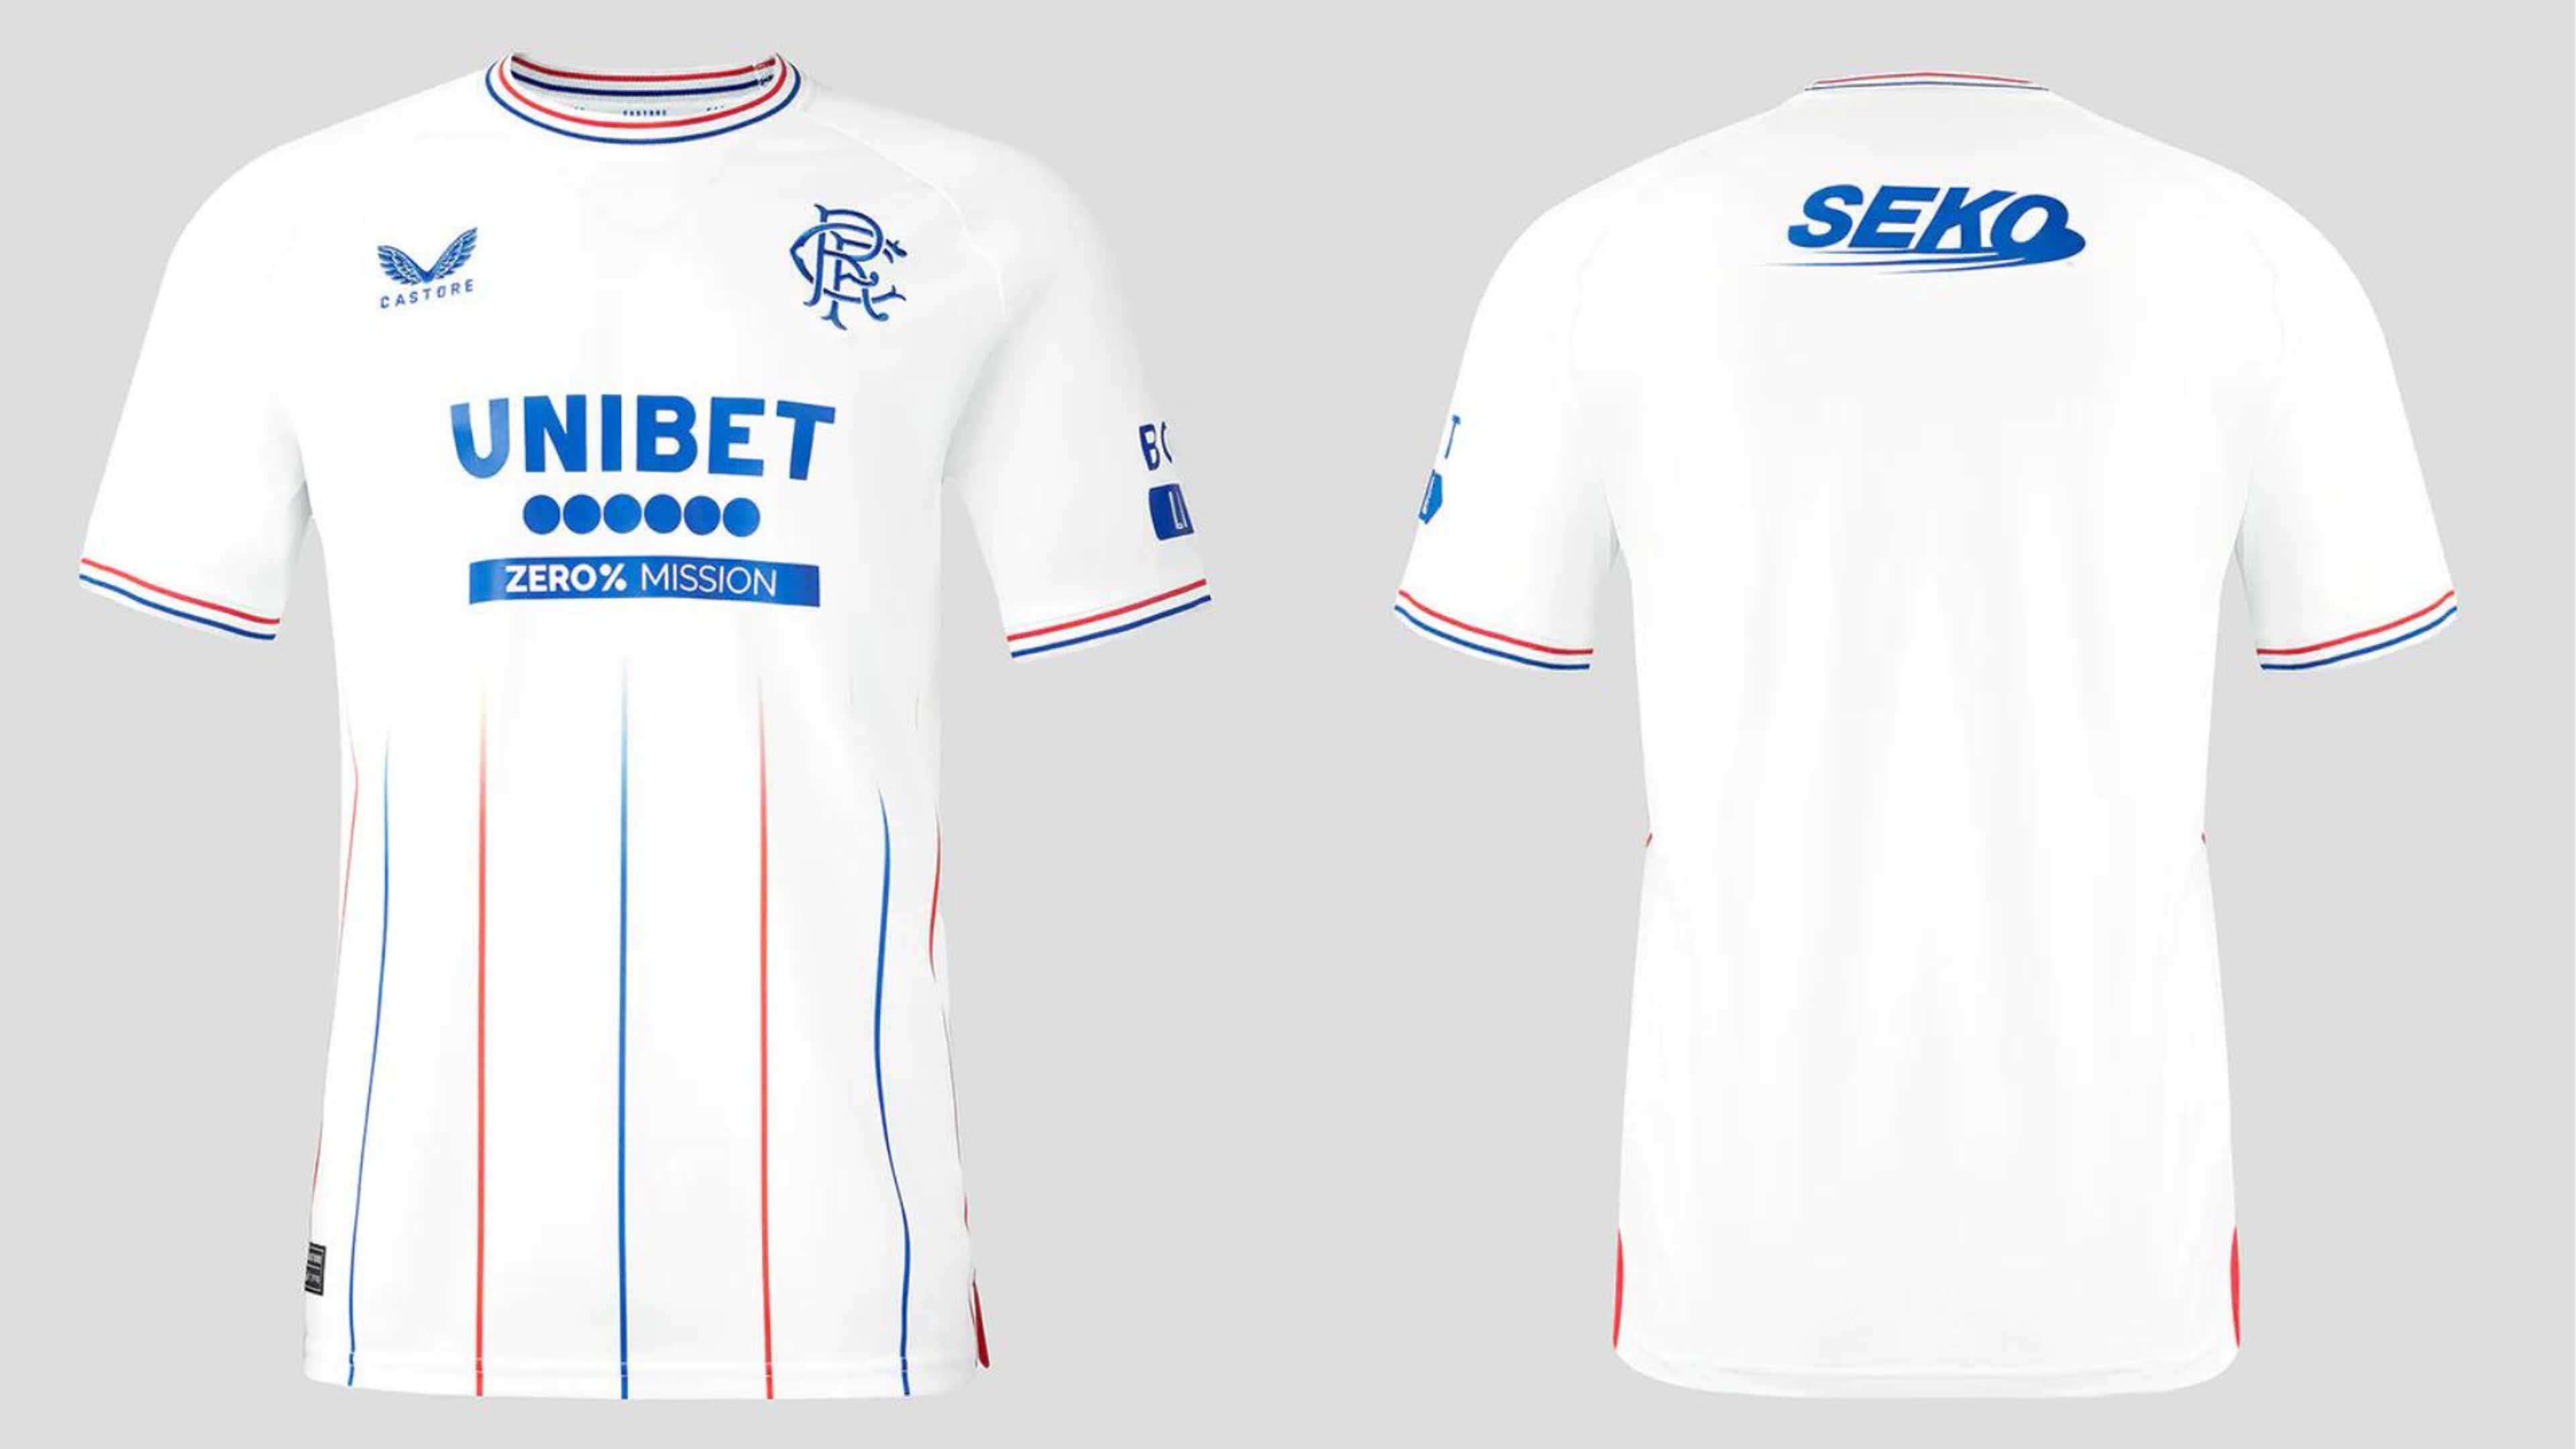 New Rangers 21/22 Castore home kit 'could've been leaked' in